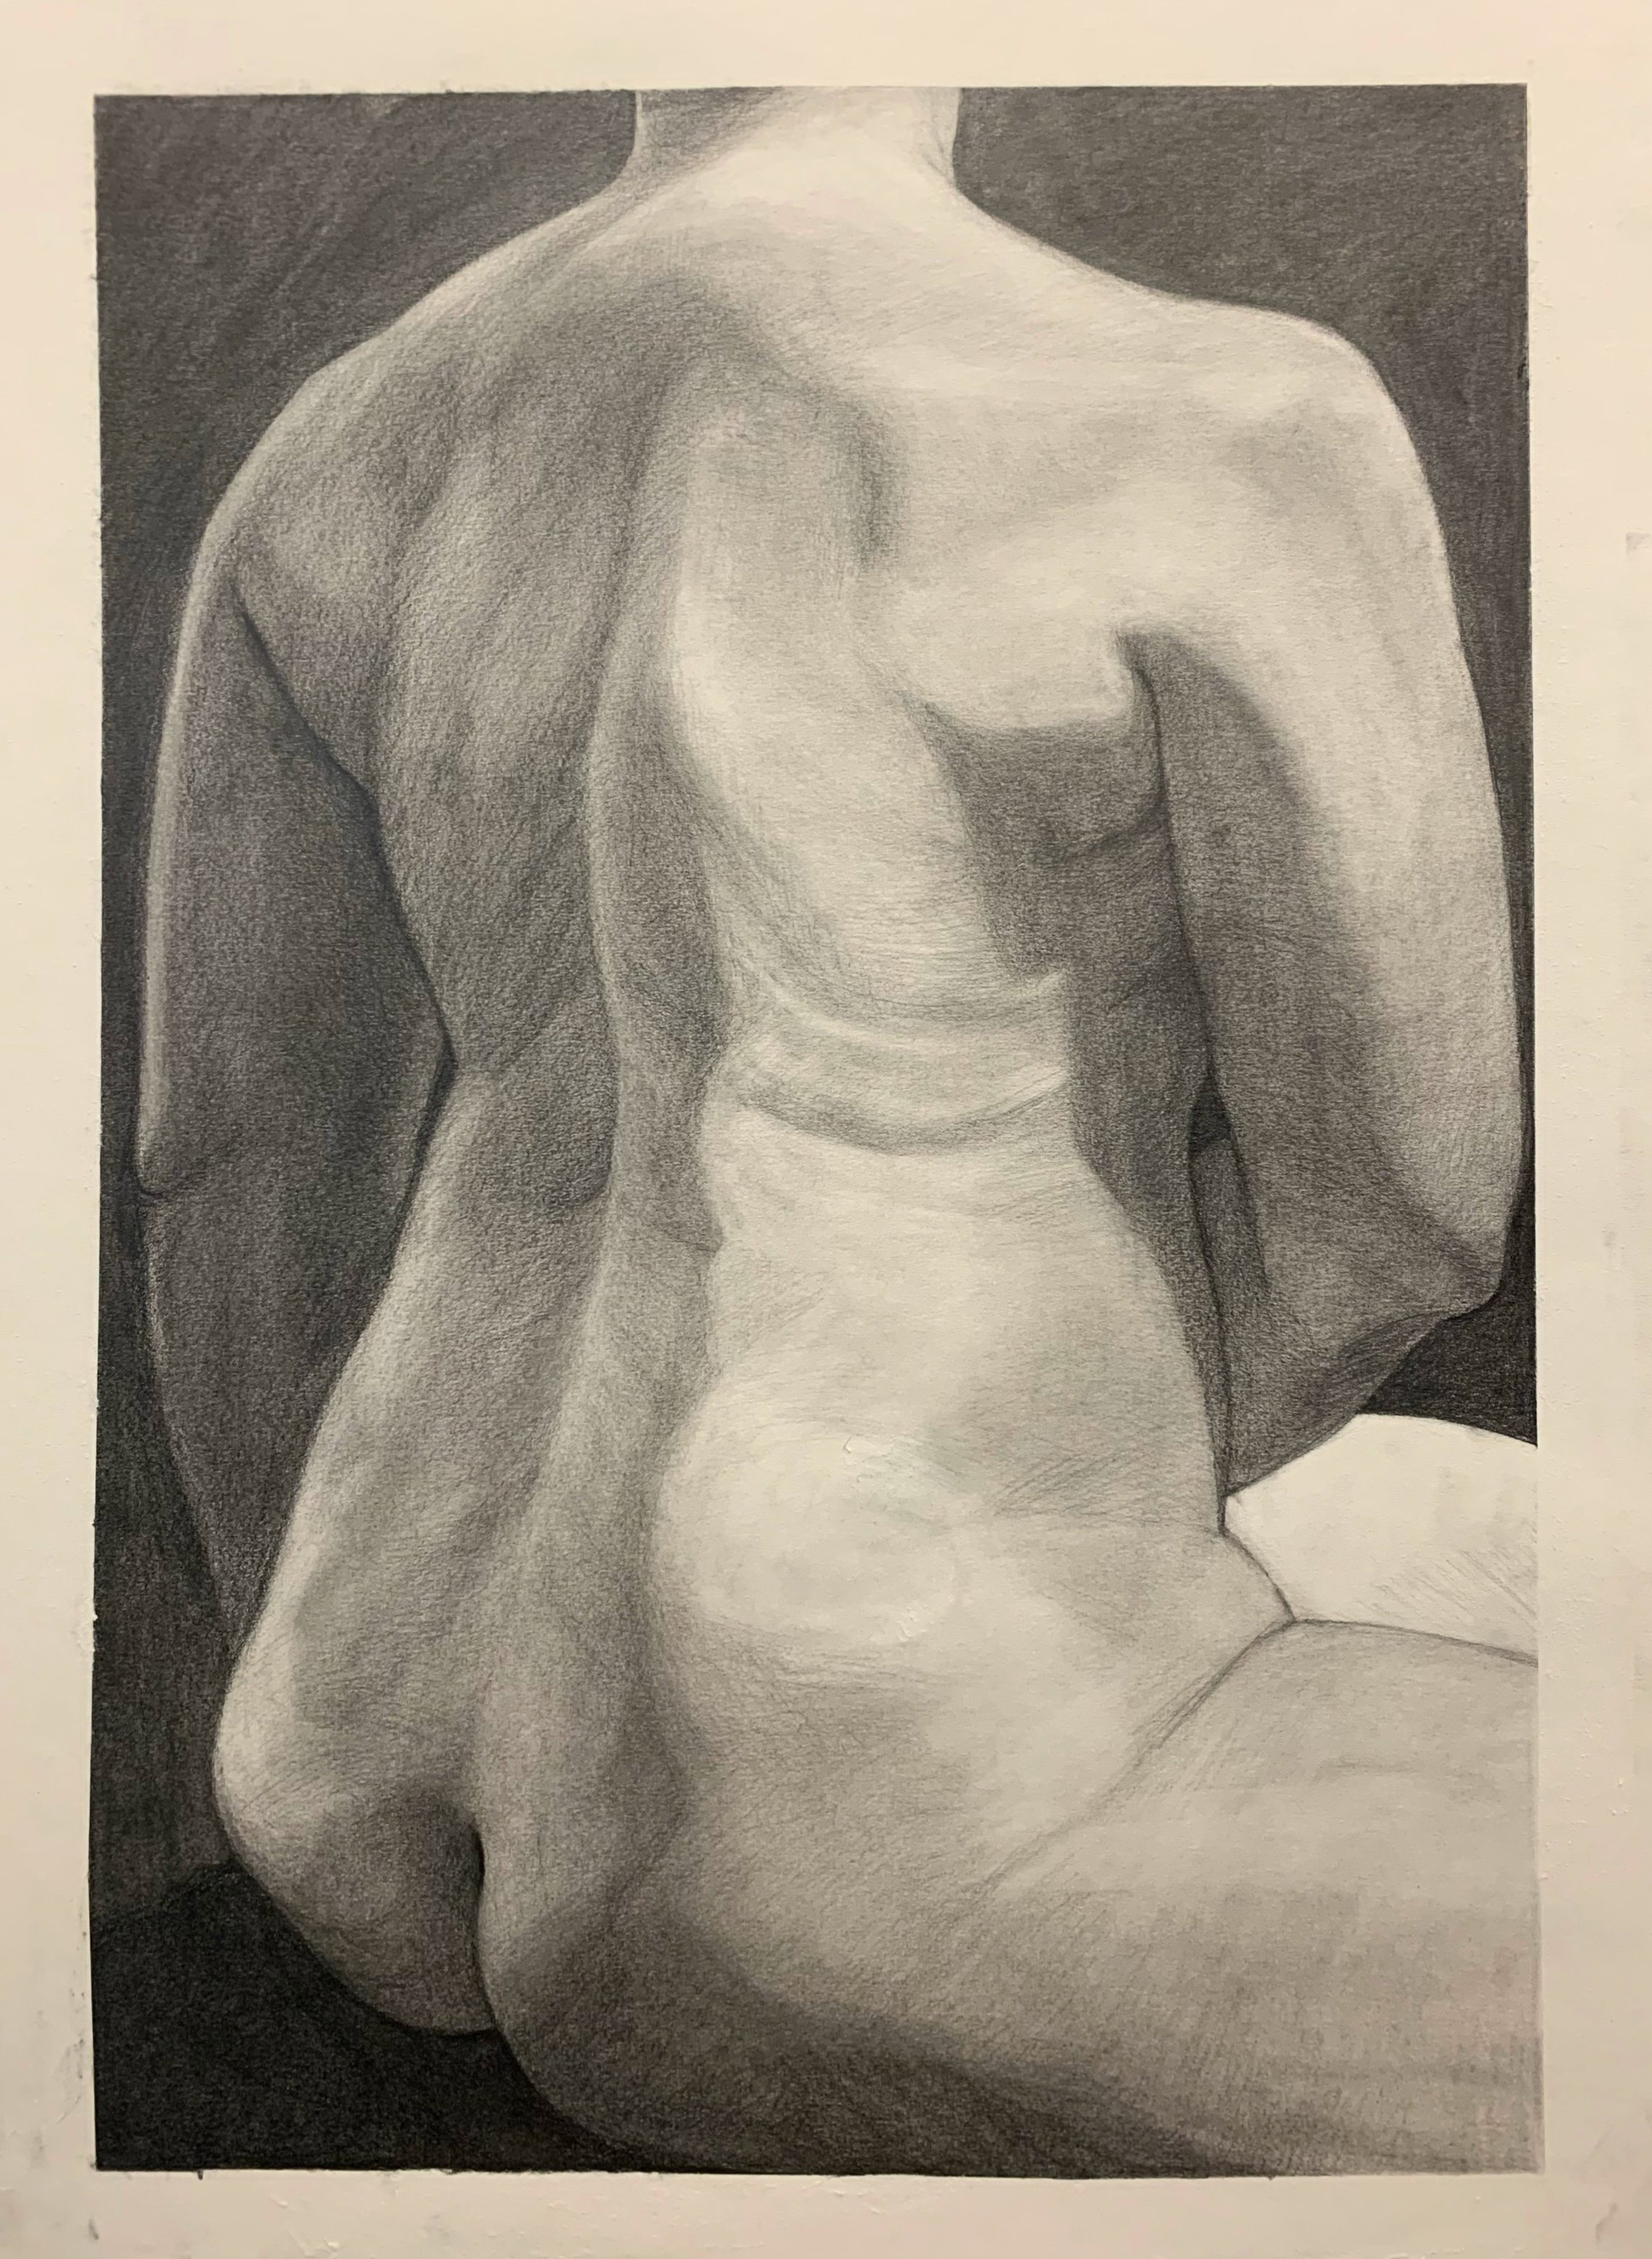  4 week figure drawing from life, graphite, 18x24” 